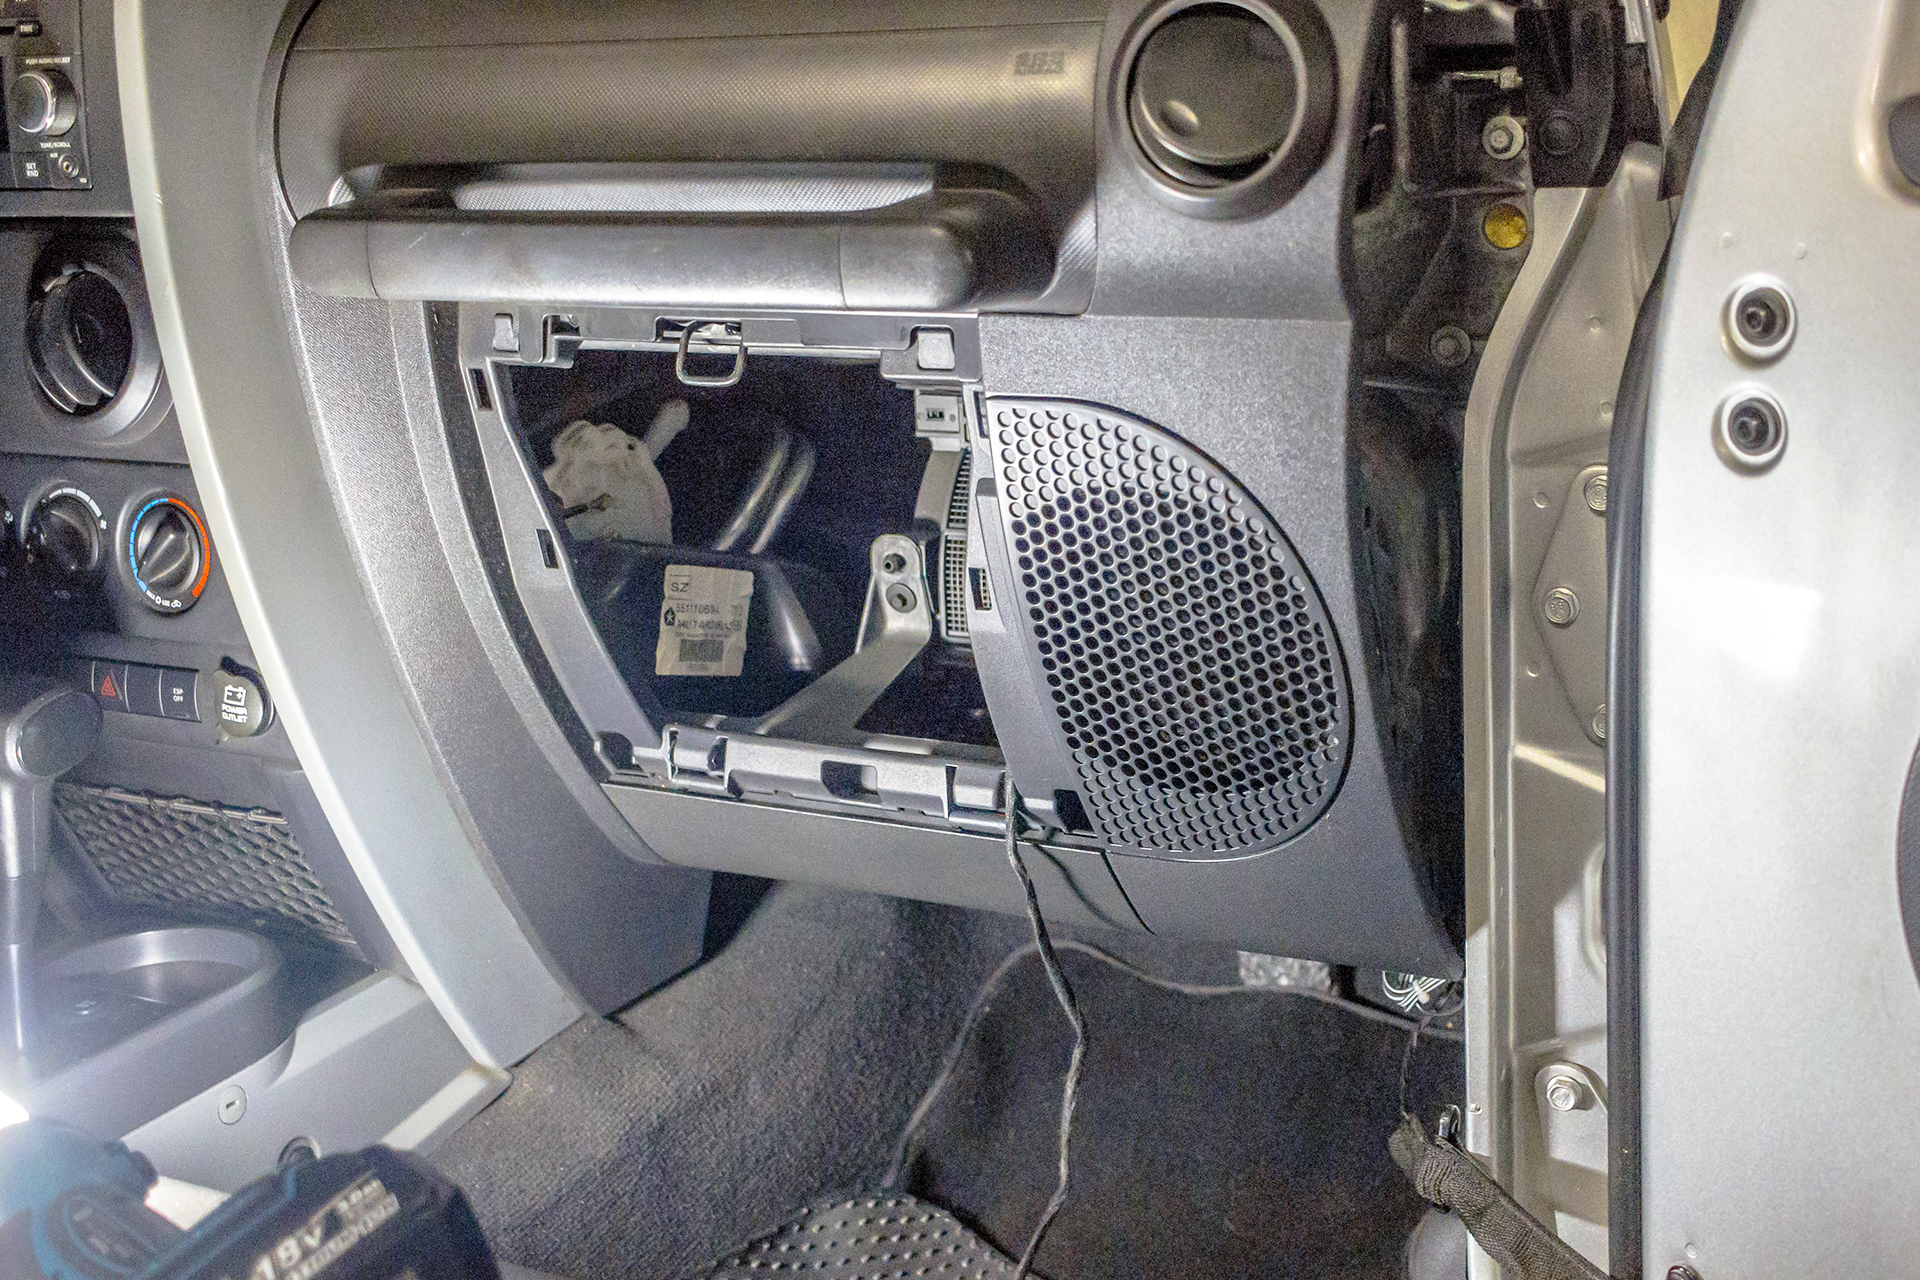 Added some new functionality and better sound to this 2009 Jeep Wrangler! —  Twelve Volt Technologies